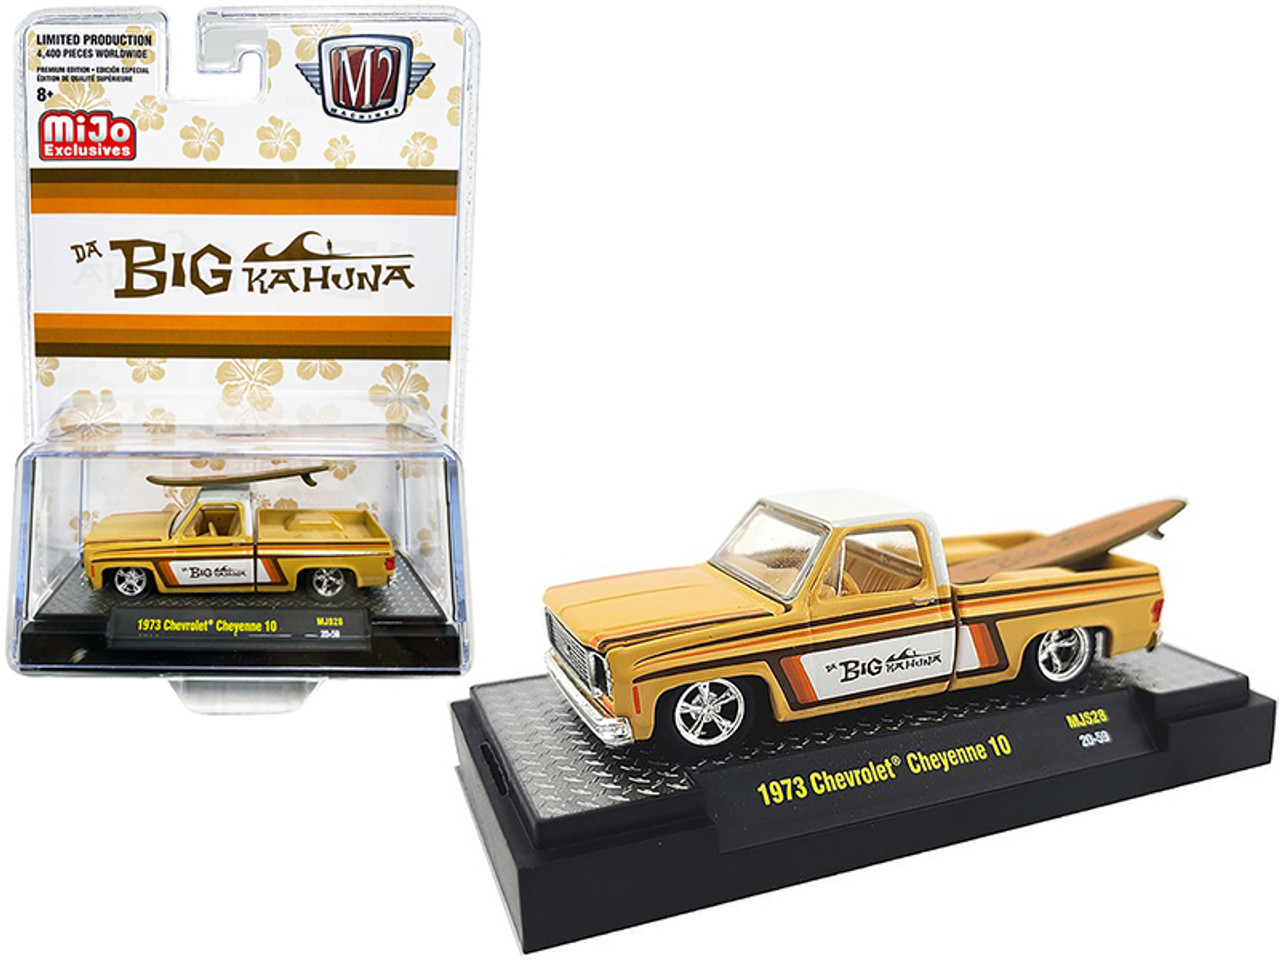 1973 Chevrolet Cheyenne 10 Pickup Truck with Surfboard "Big Kahuna" Limited Edition to 4400 pieces Worldwide 1/64 Diecast Model Car by M2 Machines